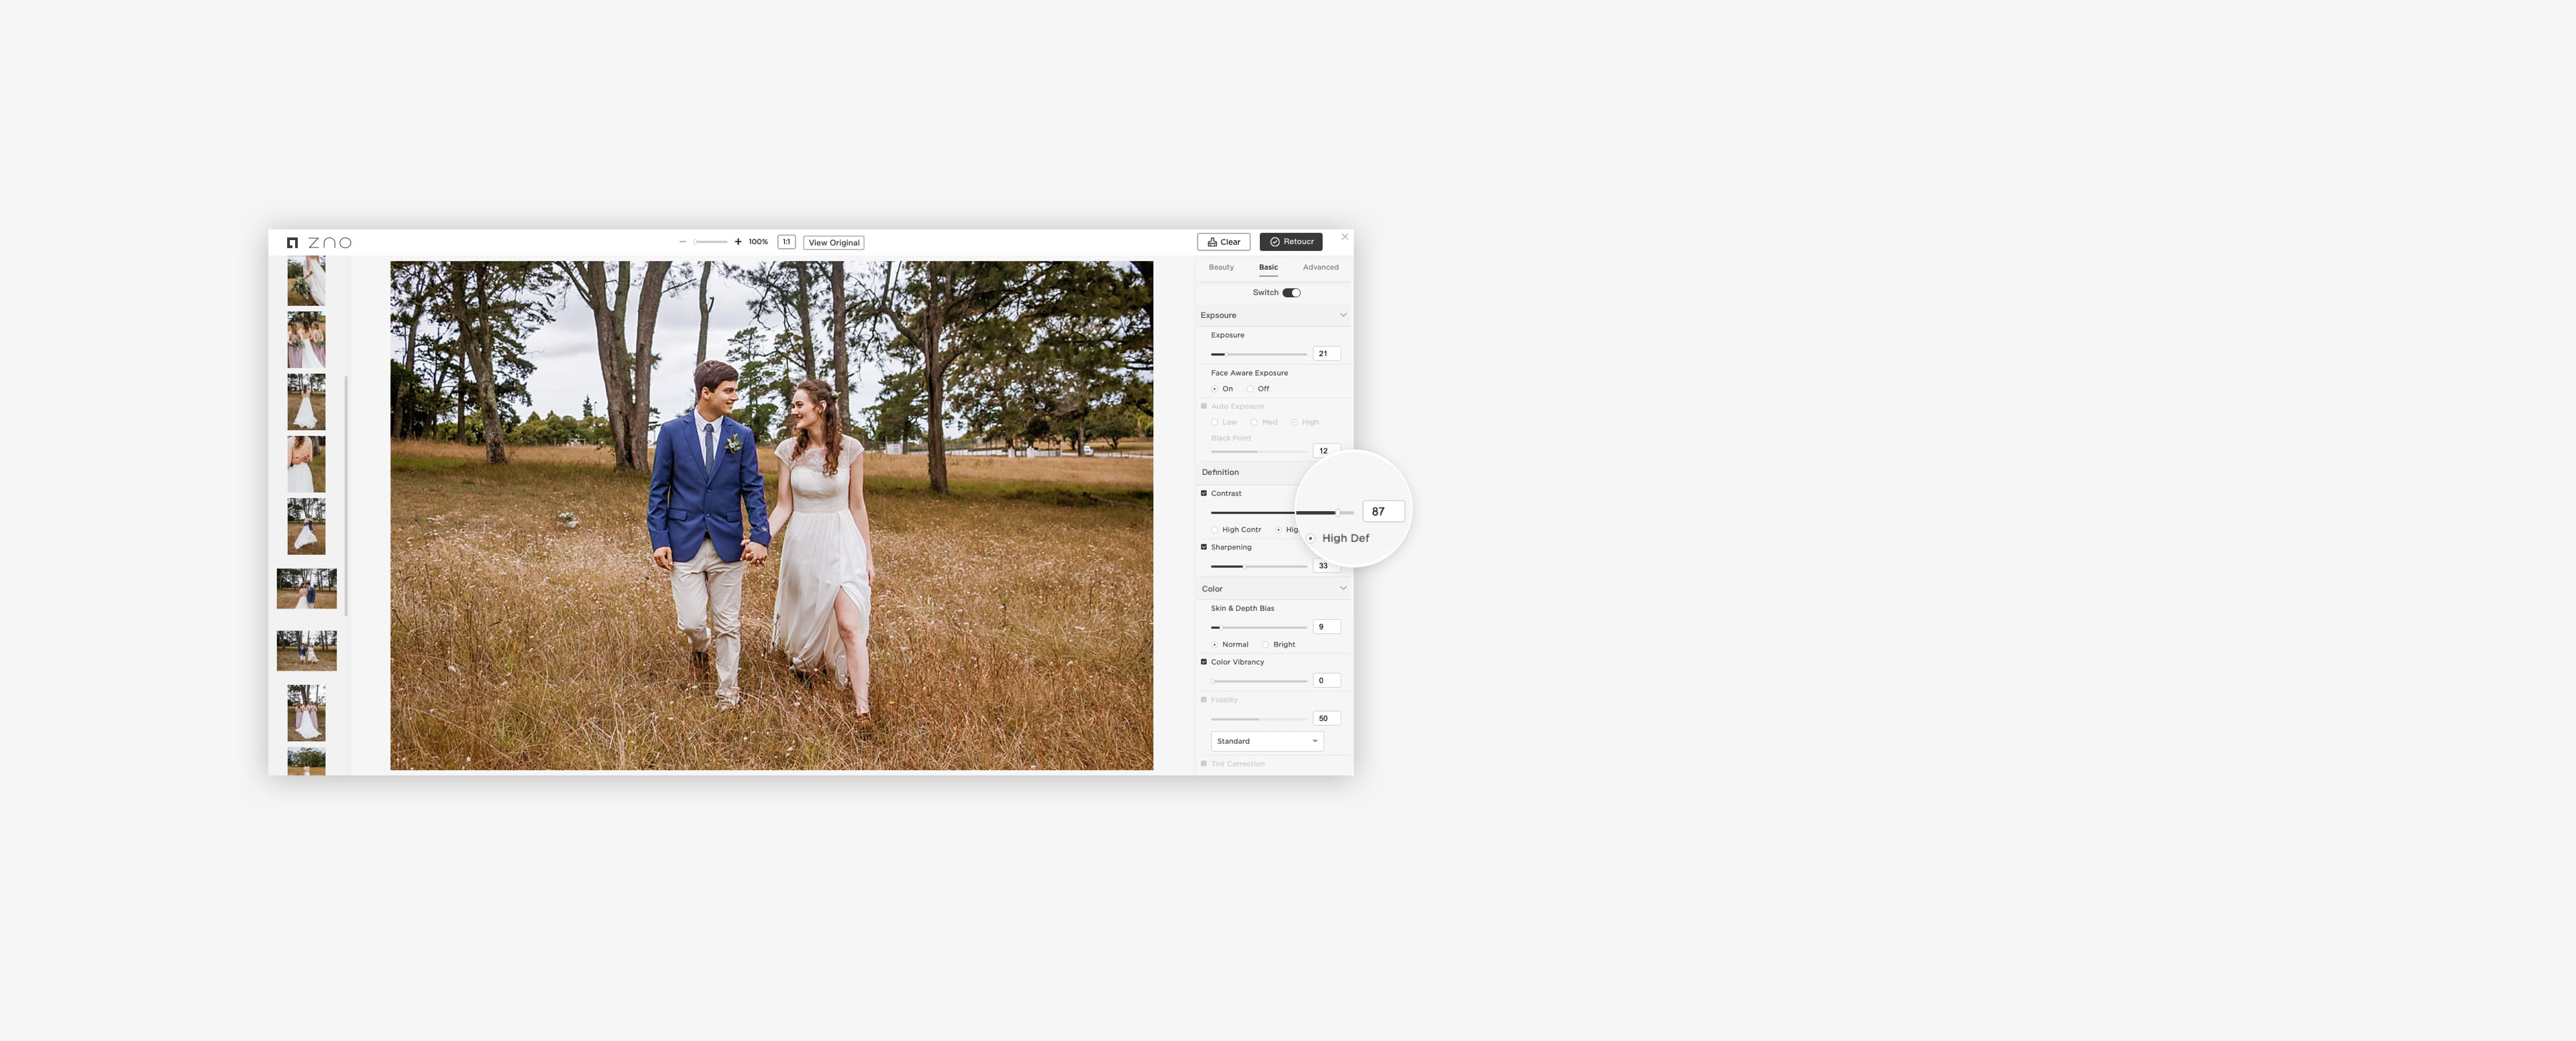 zno retoucher is used to individually edit photos